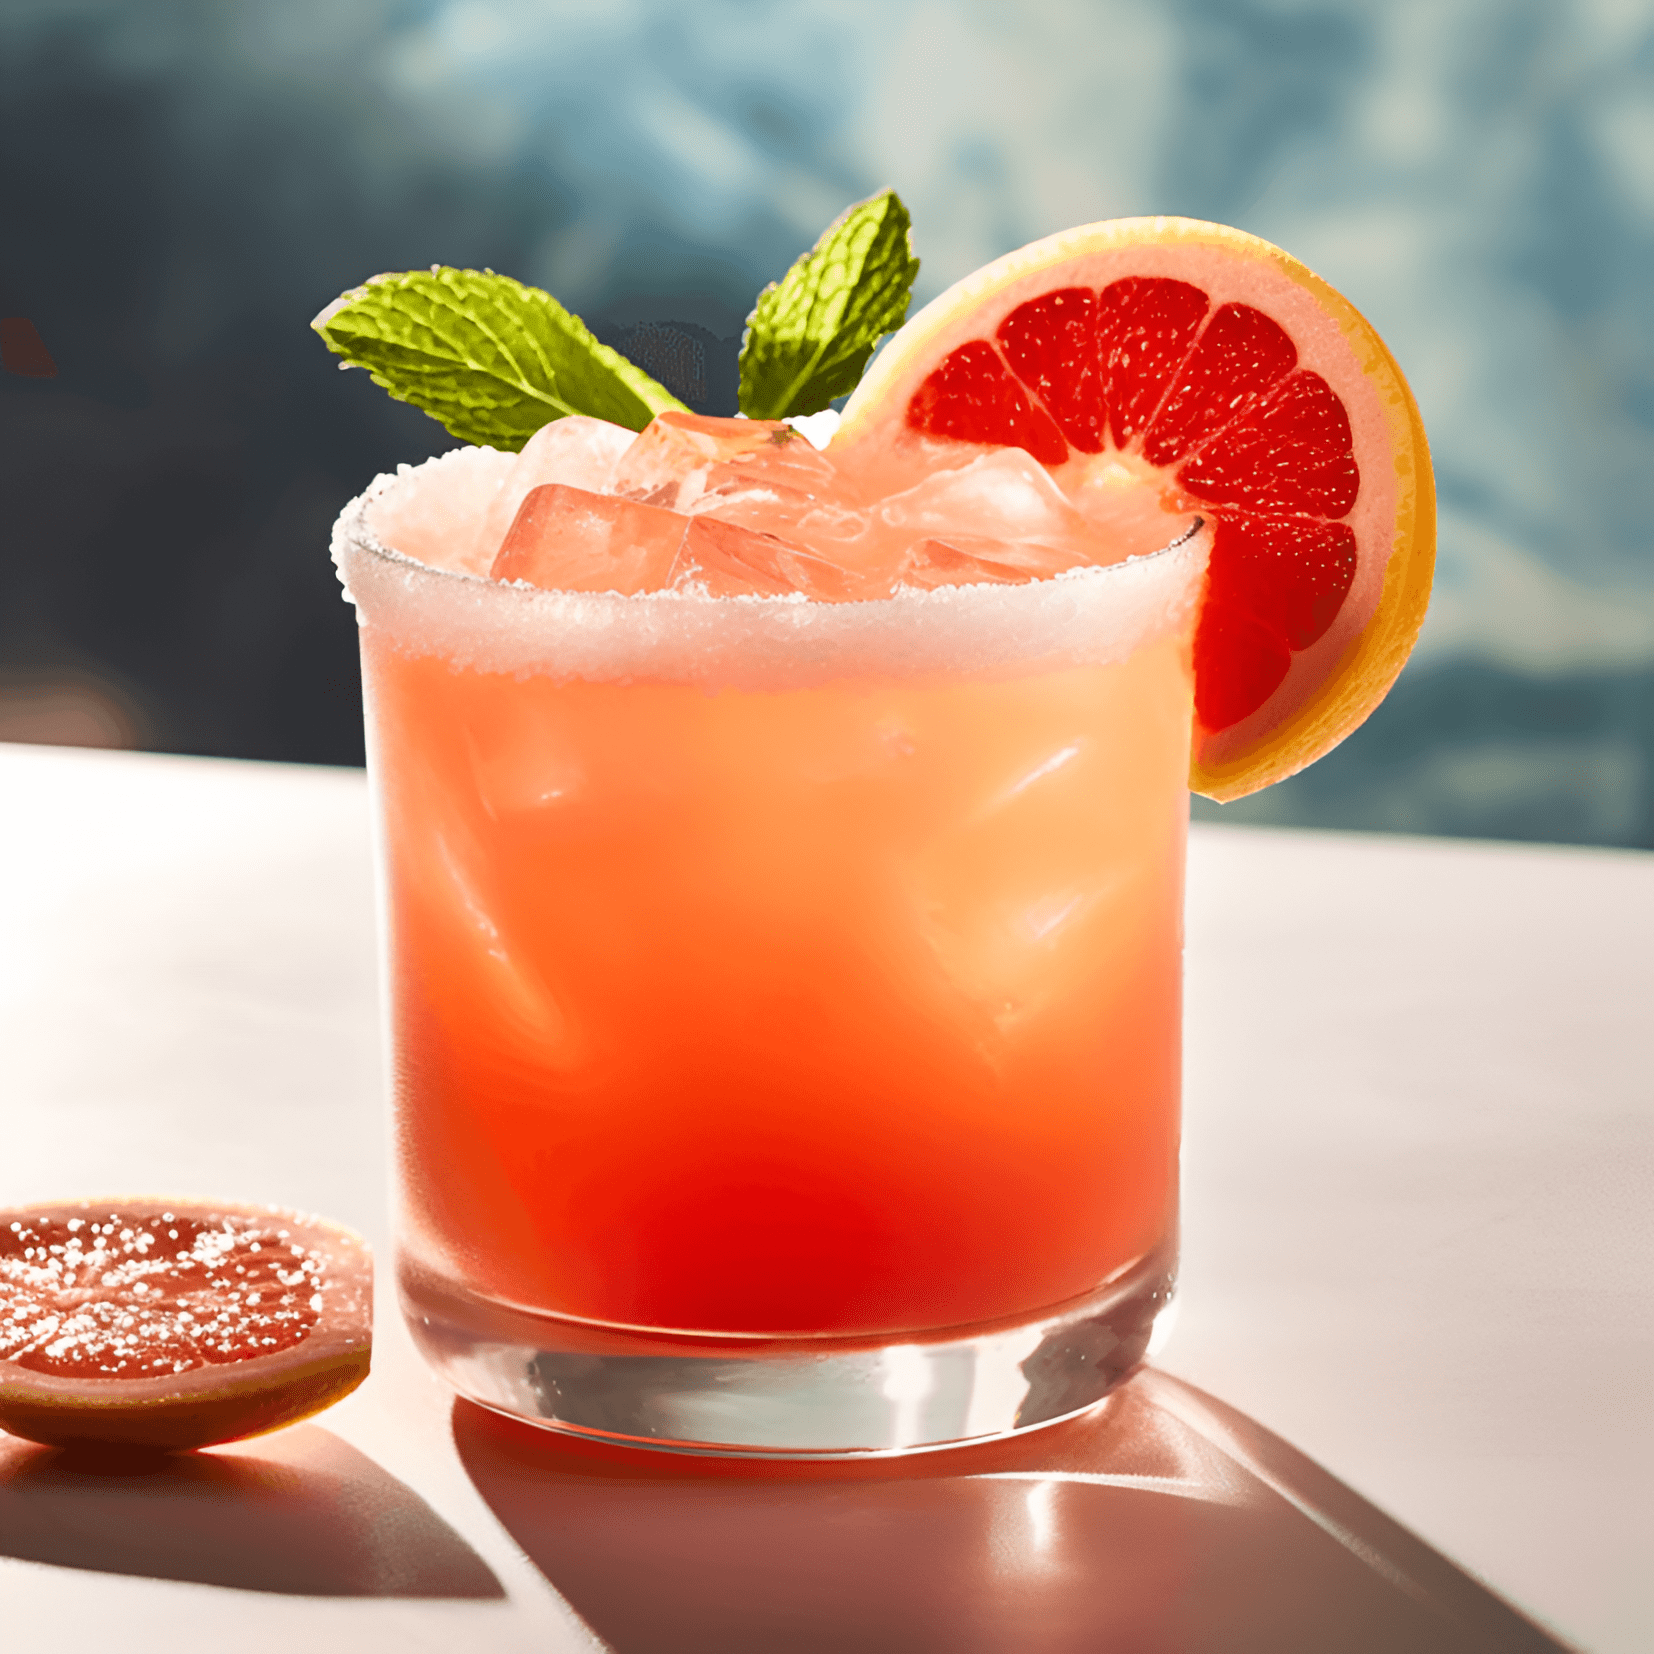 The Grapefruit Margarita is a perfect balance of sweet, sour, and slightly bitter flavors. The tartness of the grapefruit juice is complemented by the sweetness of the agave syrup and the tangy lime juice. The tequila adds a bold, earthy undertone, while the salt rim enhances the overall taste experience.